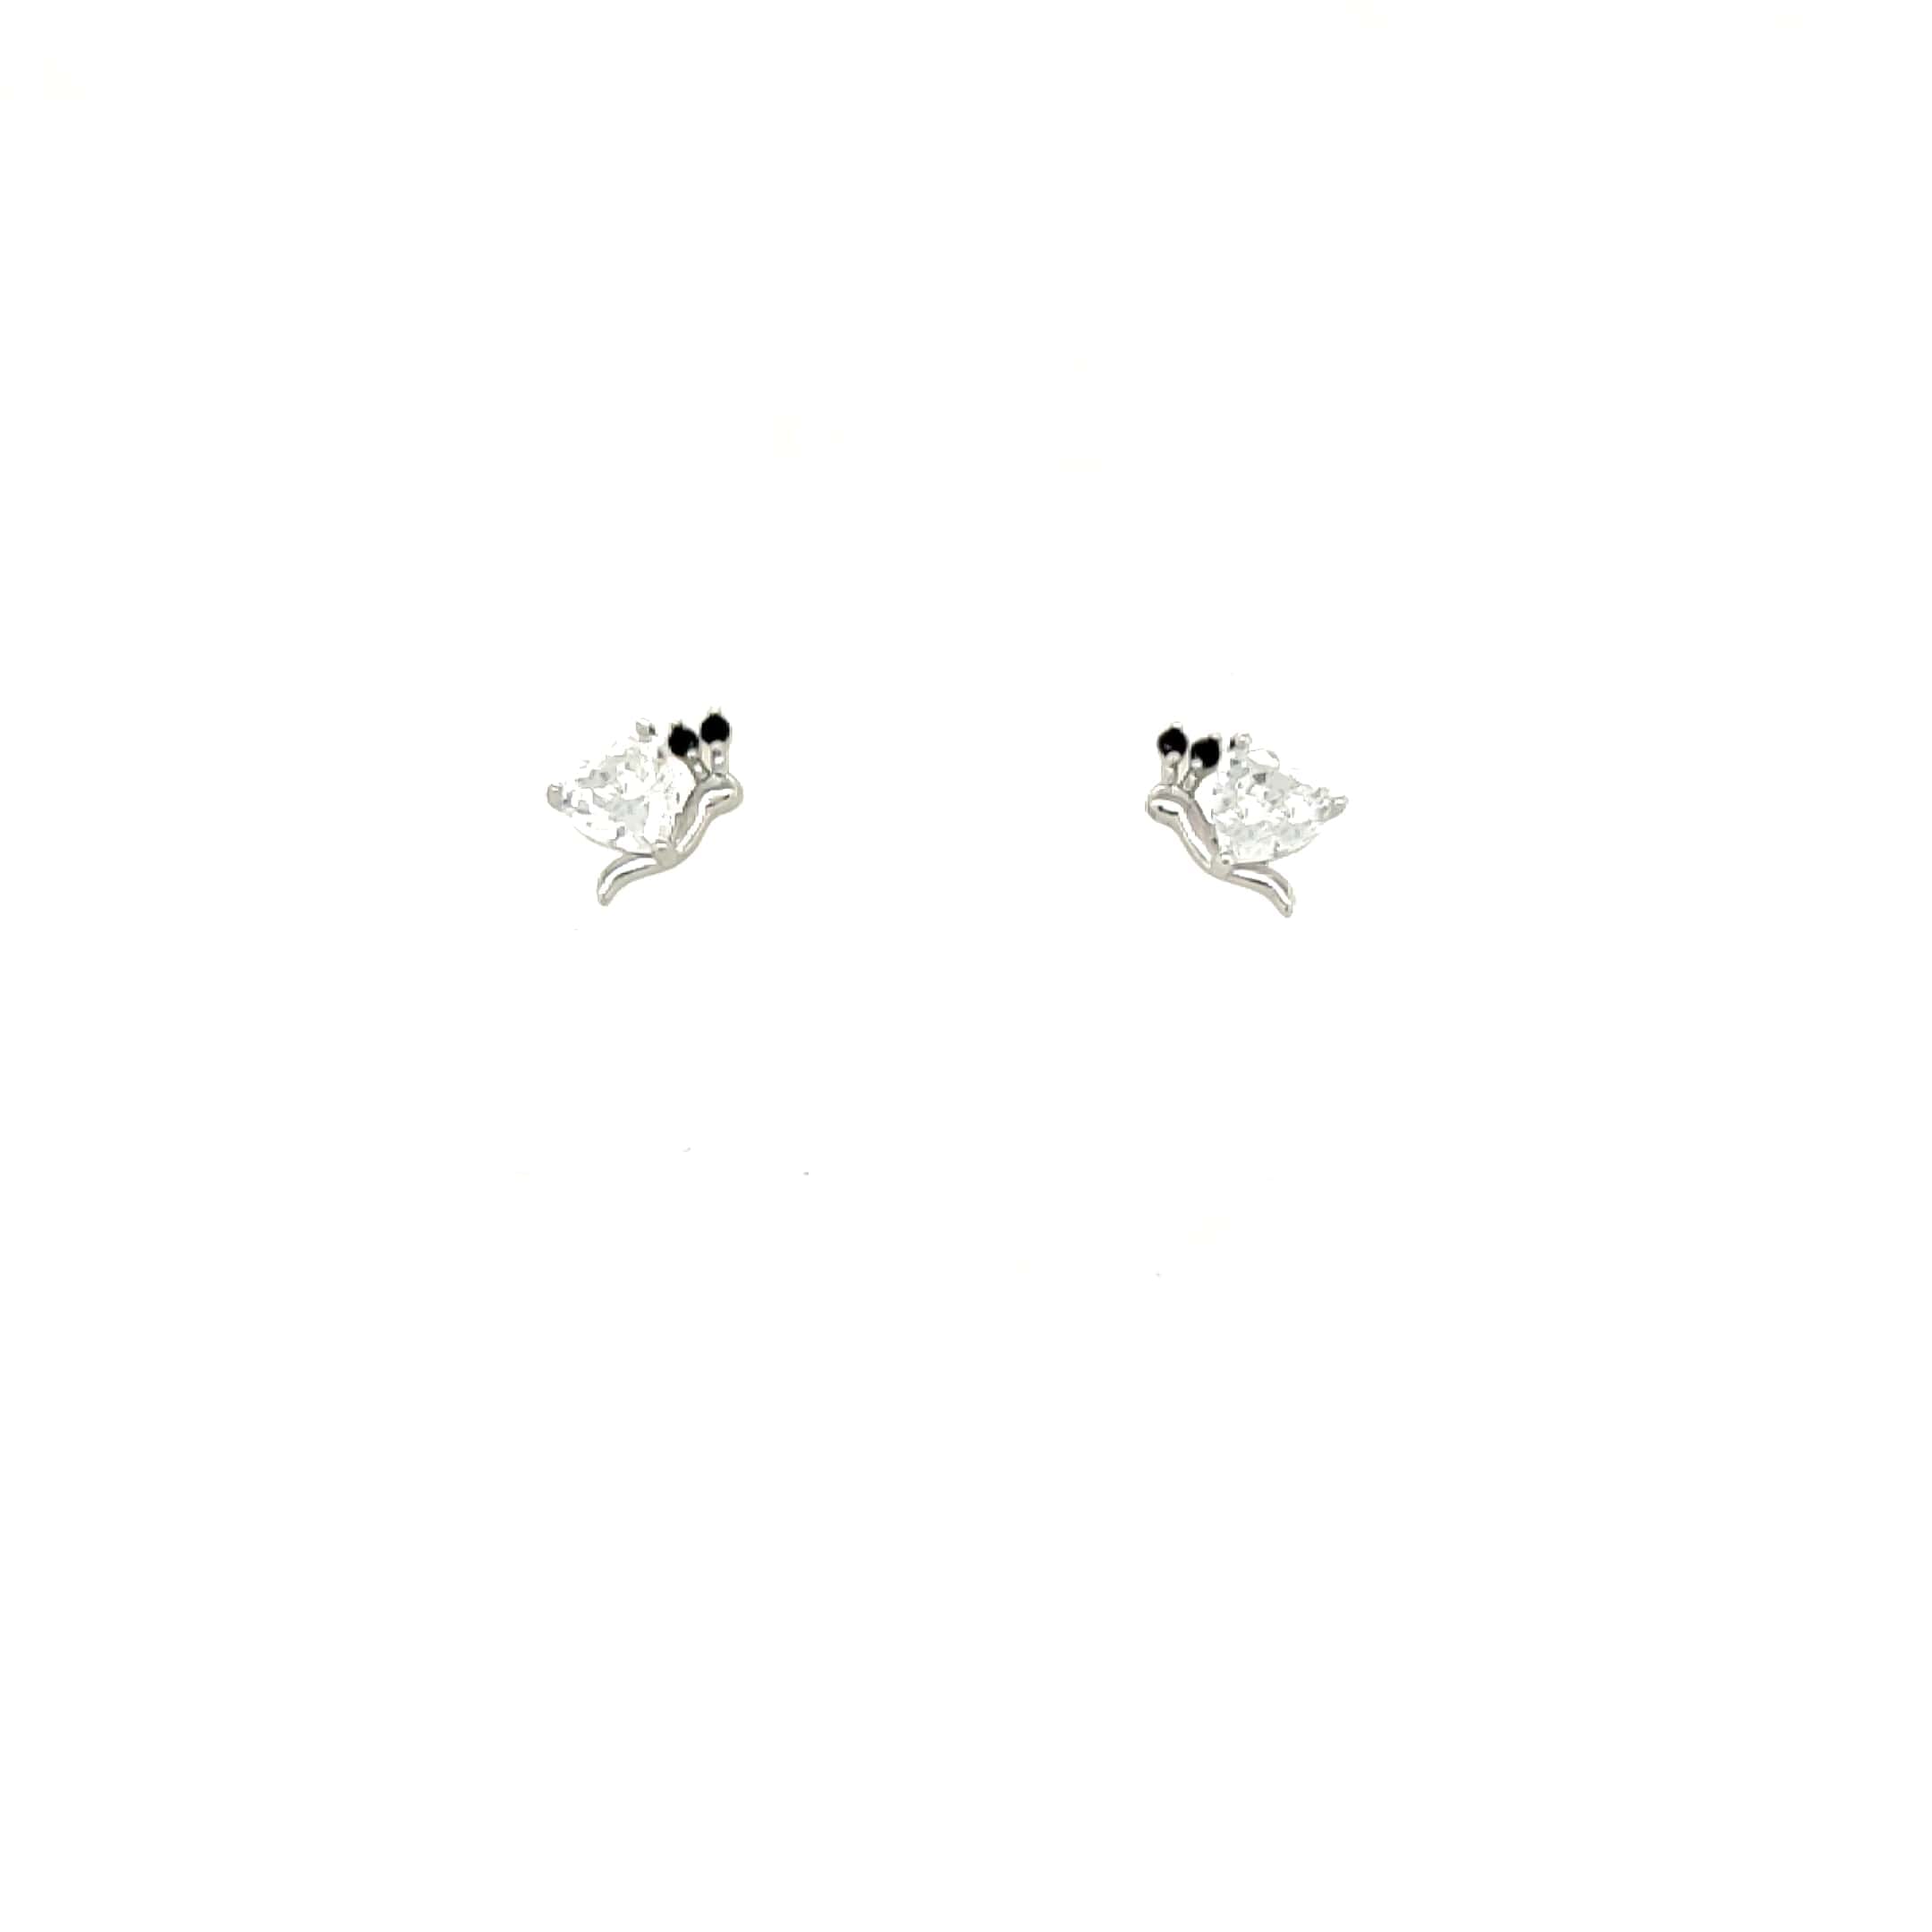 Asfour 925 Sterling Silver Stud Earrings Inlaid With Zircon Stones